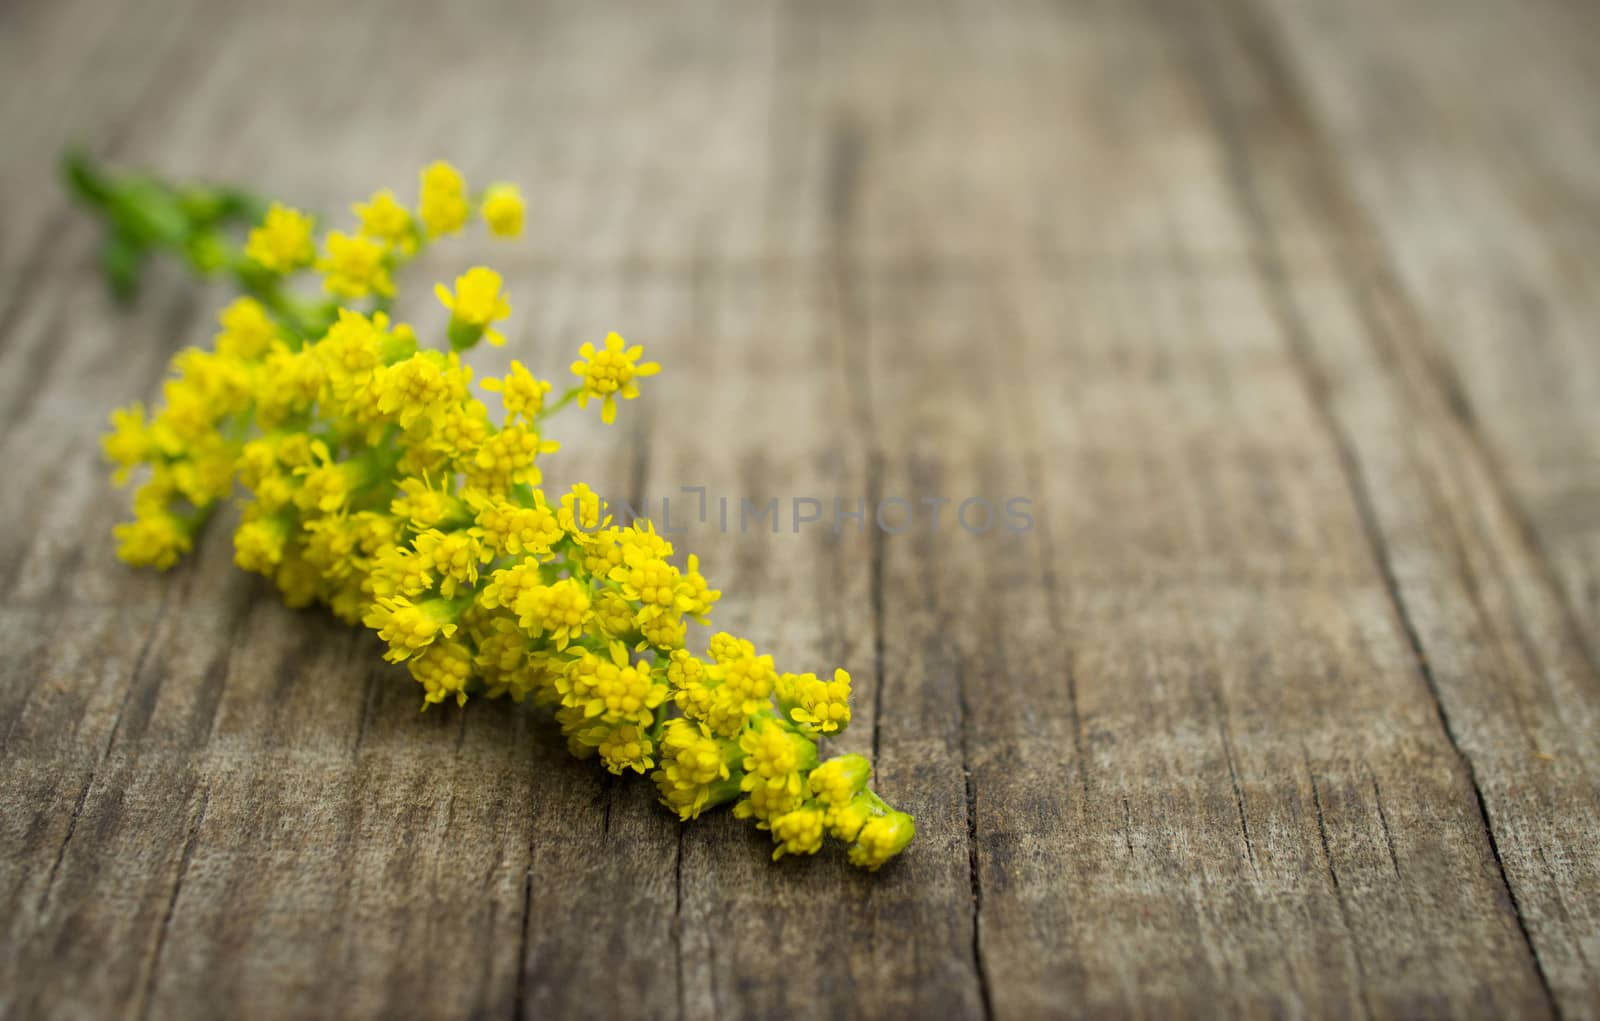 Small yellow flowers on wooden textured background